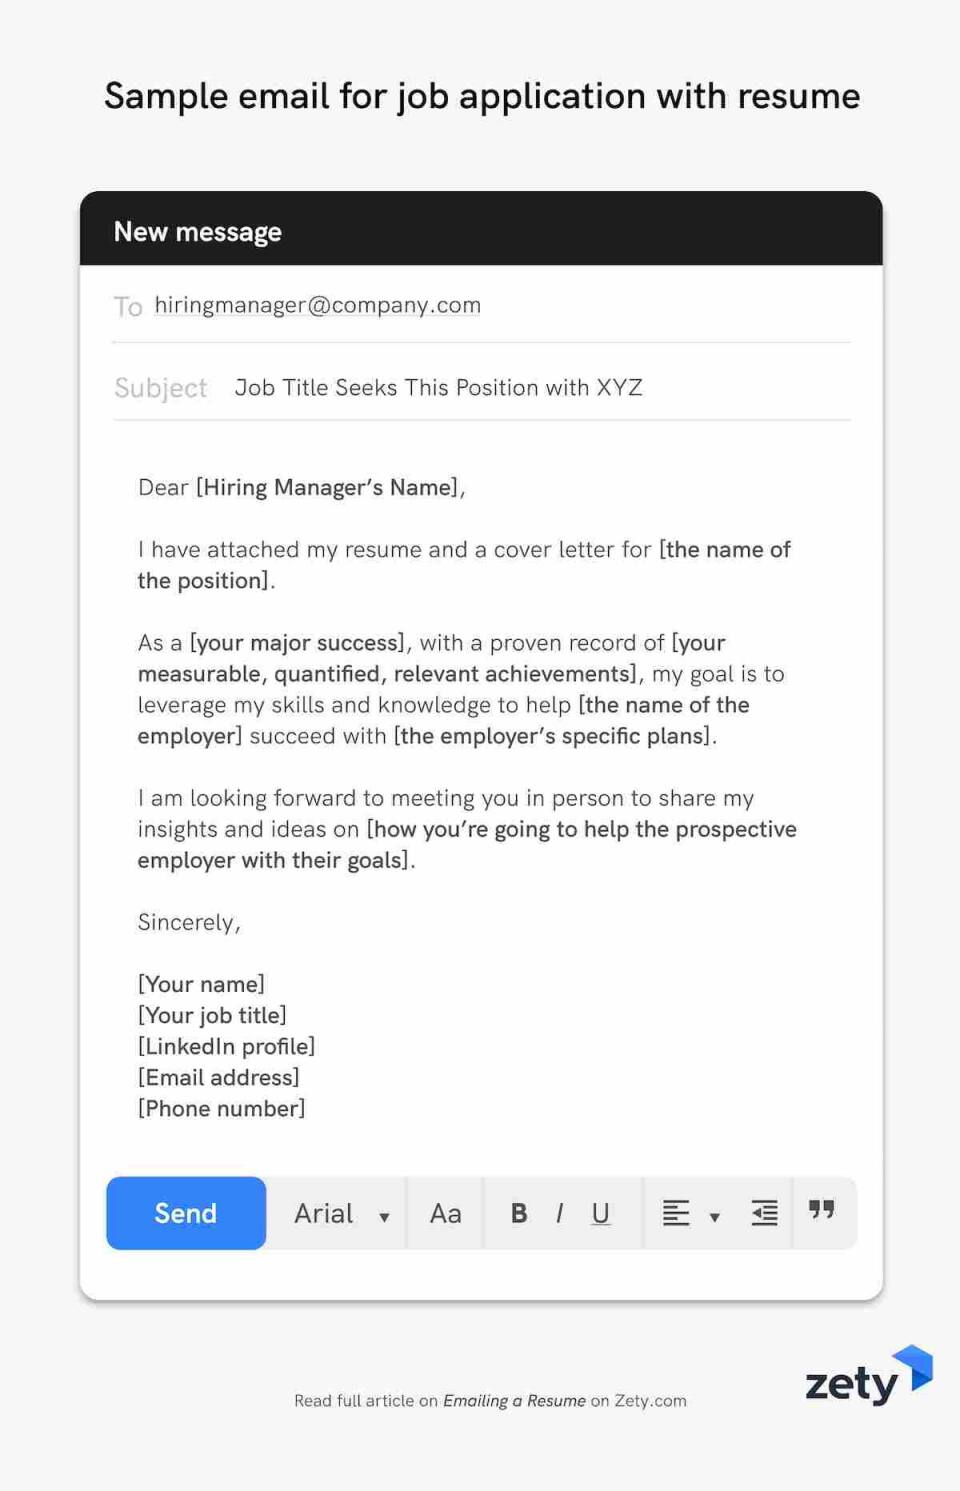 Email With Resume And Cover Letter from cdn-images.zety.com